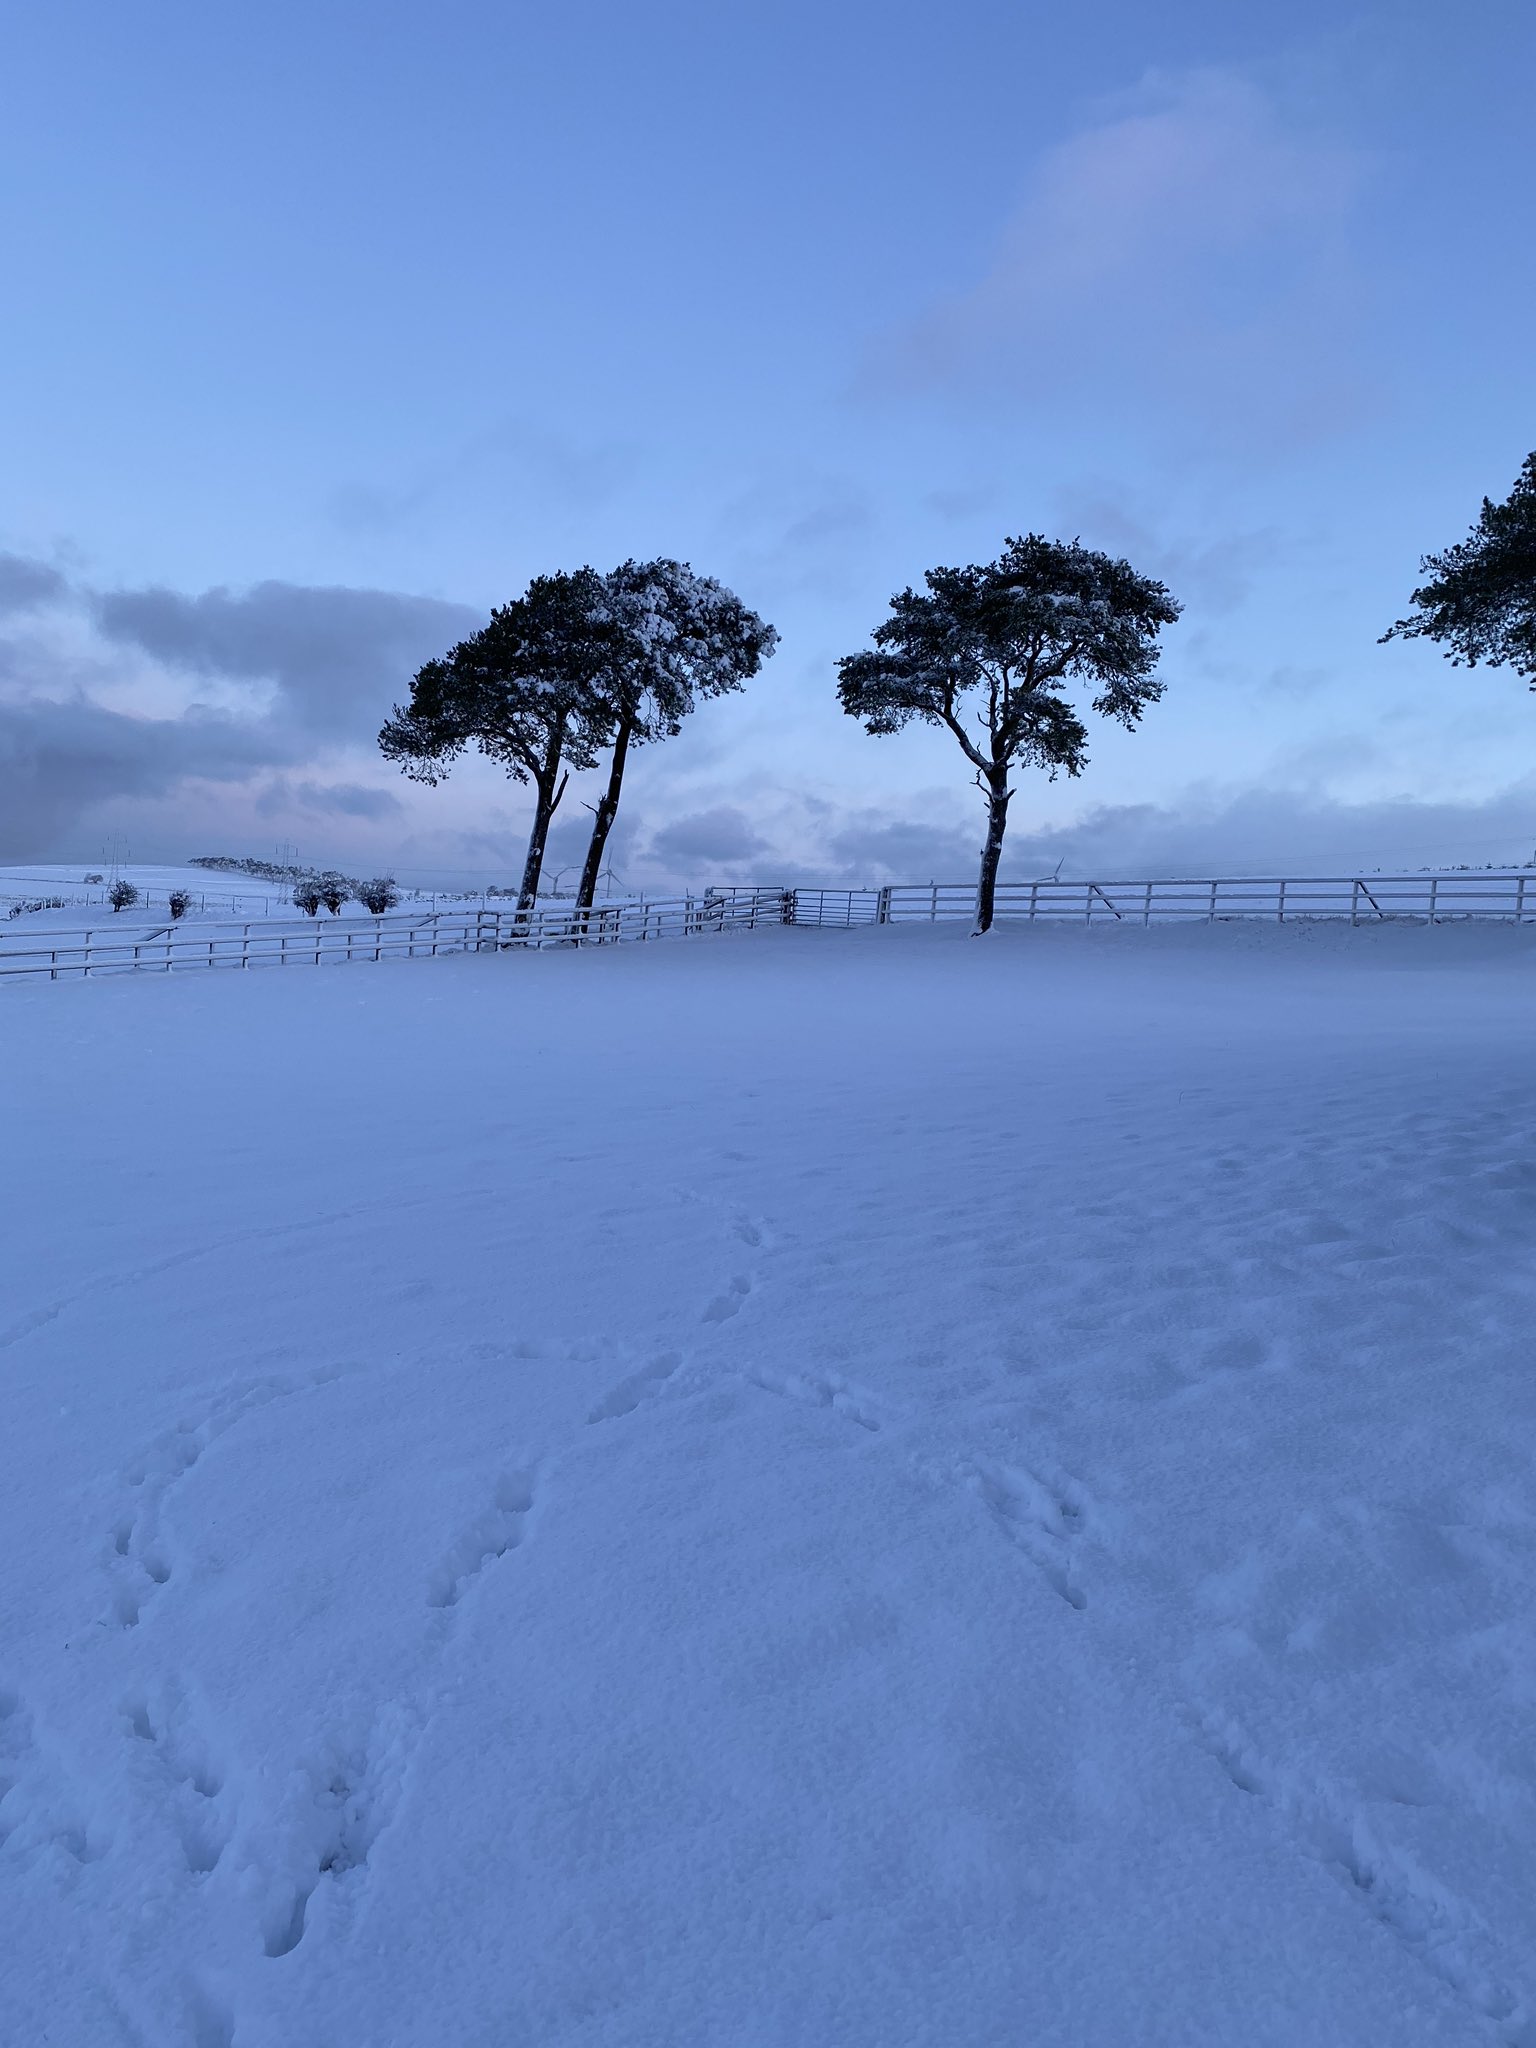 Snow in Lesmahagow by Jane Aird.